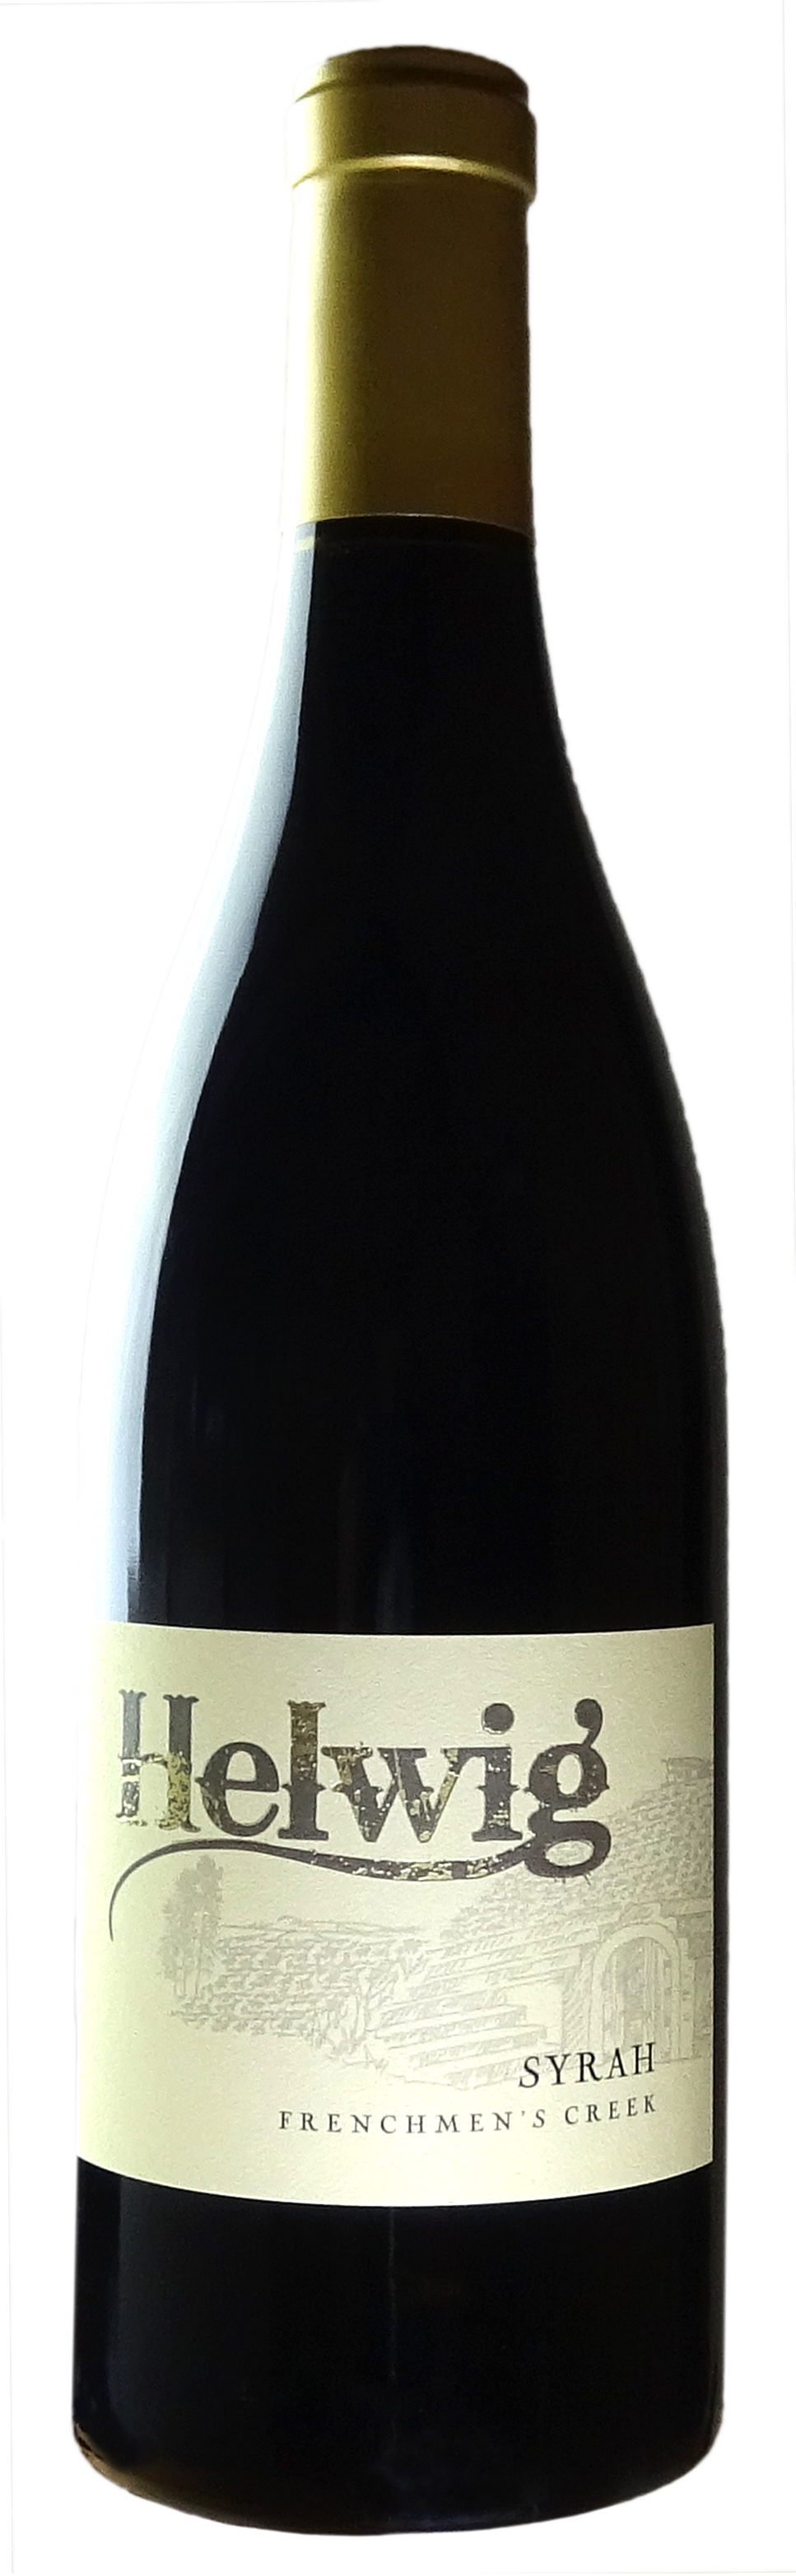 Product Image for Syrah - Frenchmen's Creek '16